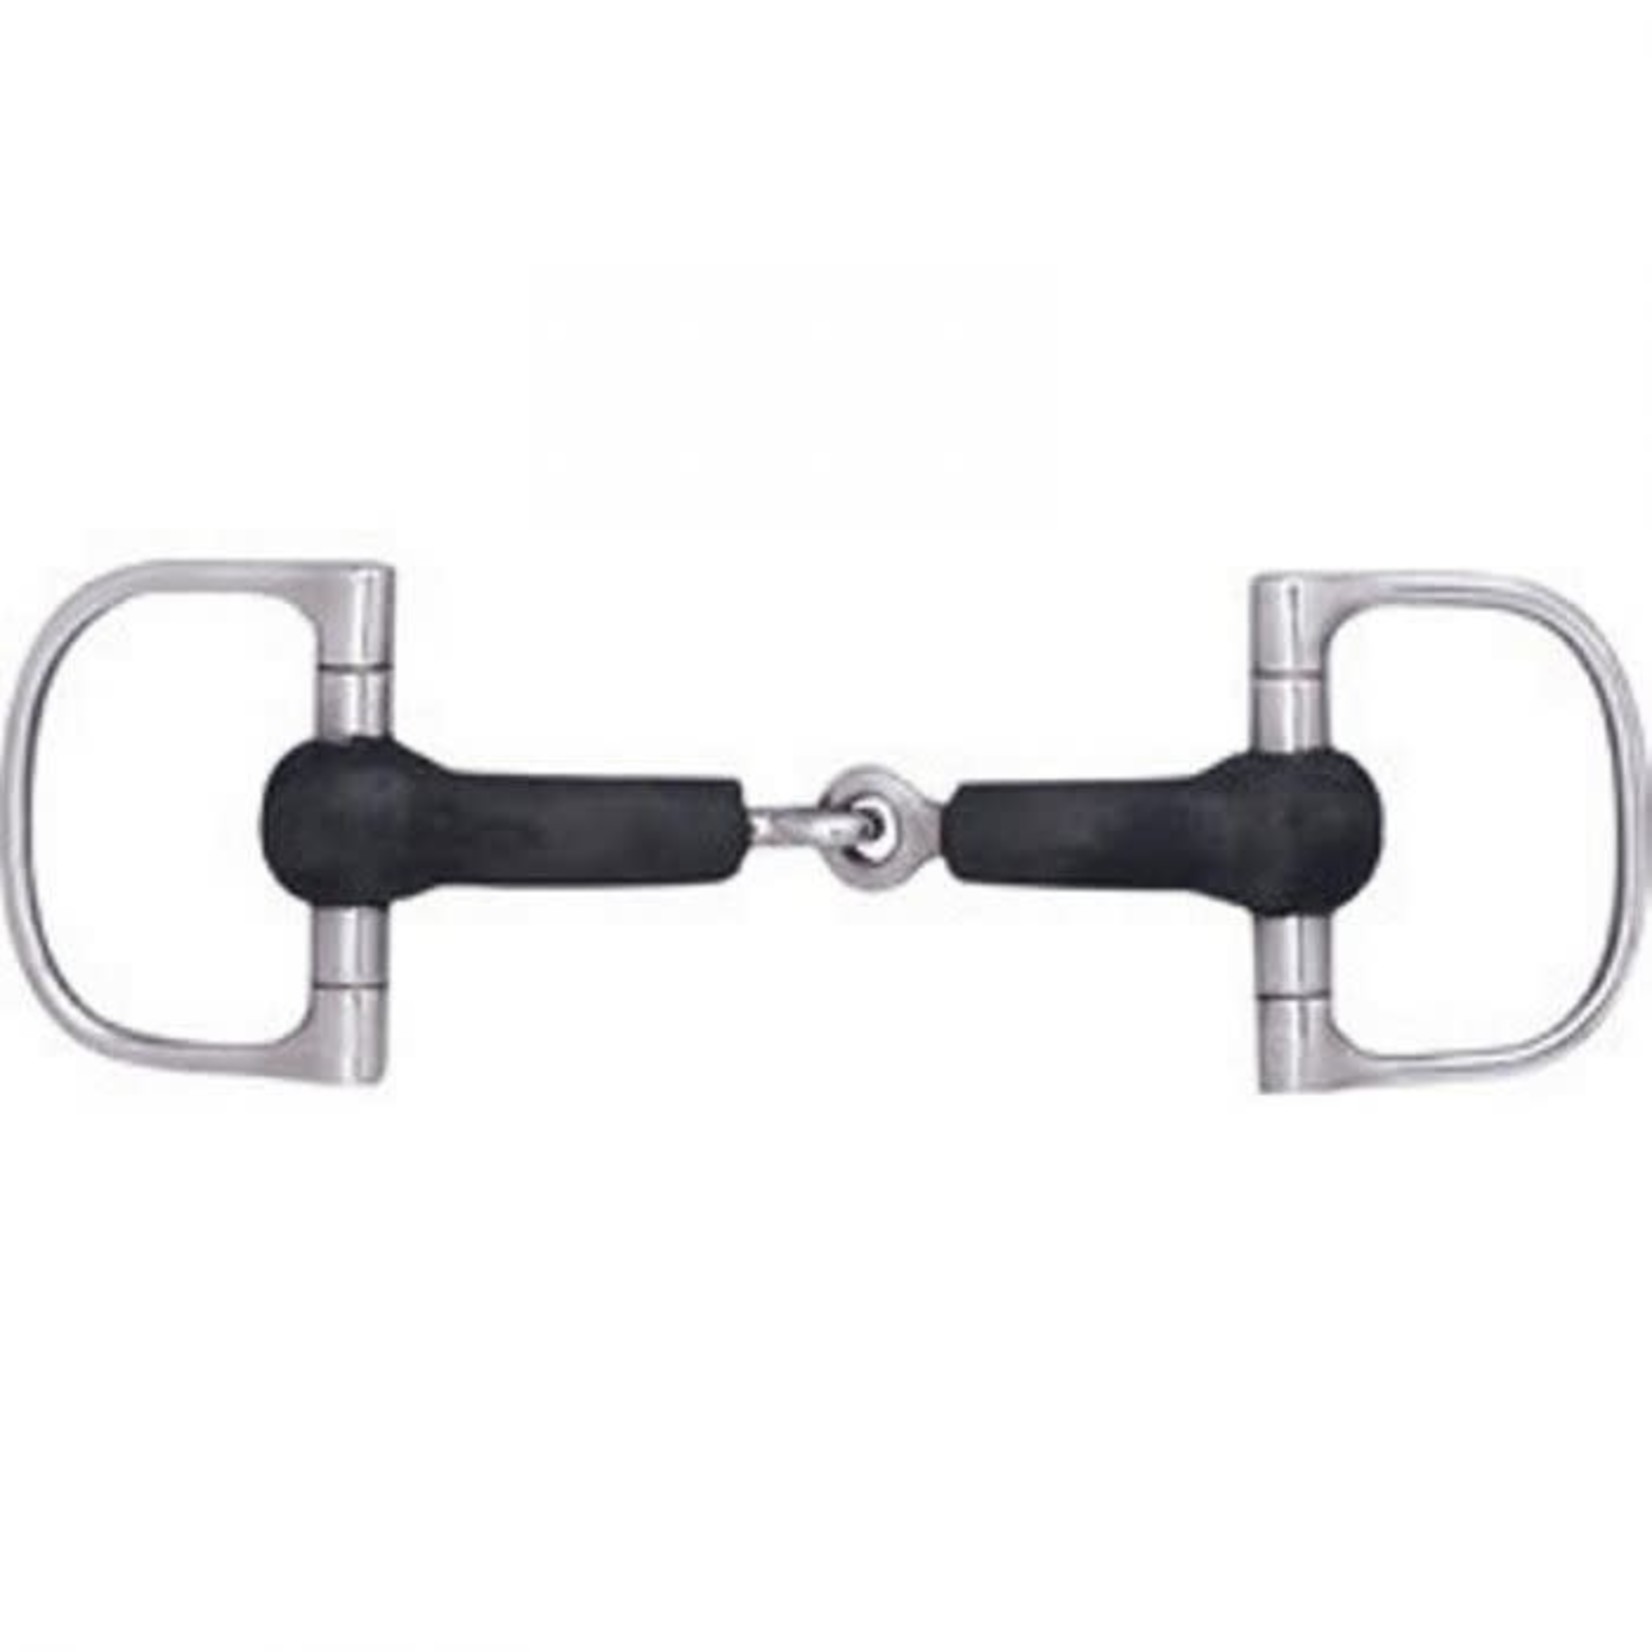 Ger-Ryan Rubber D-Ring Snaffle